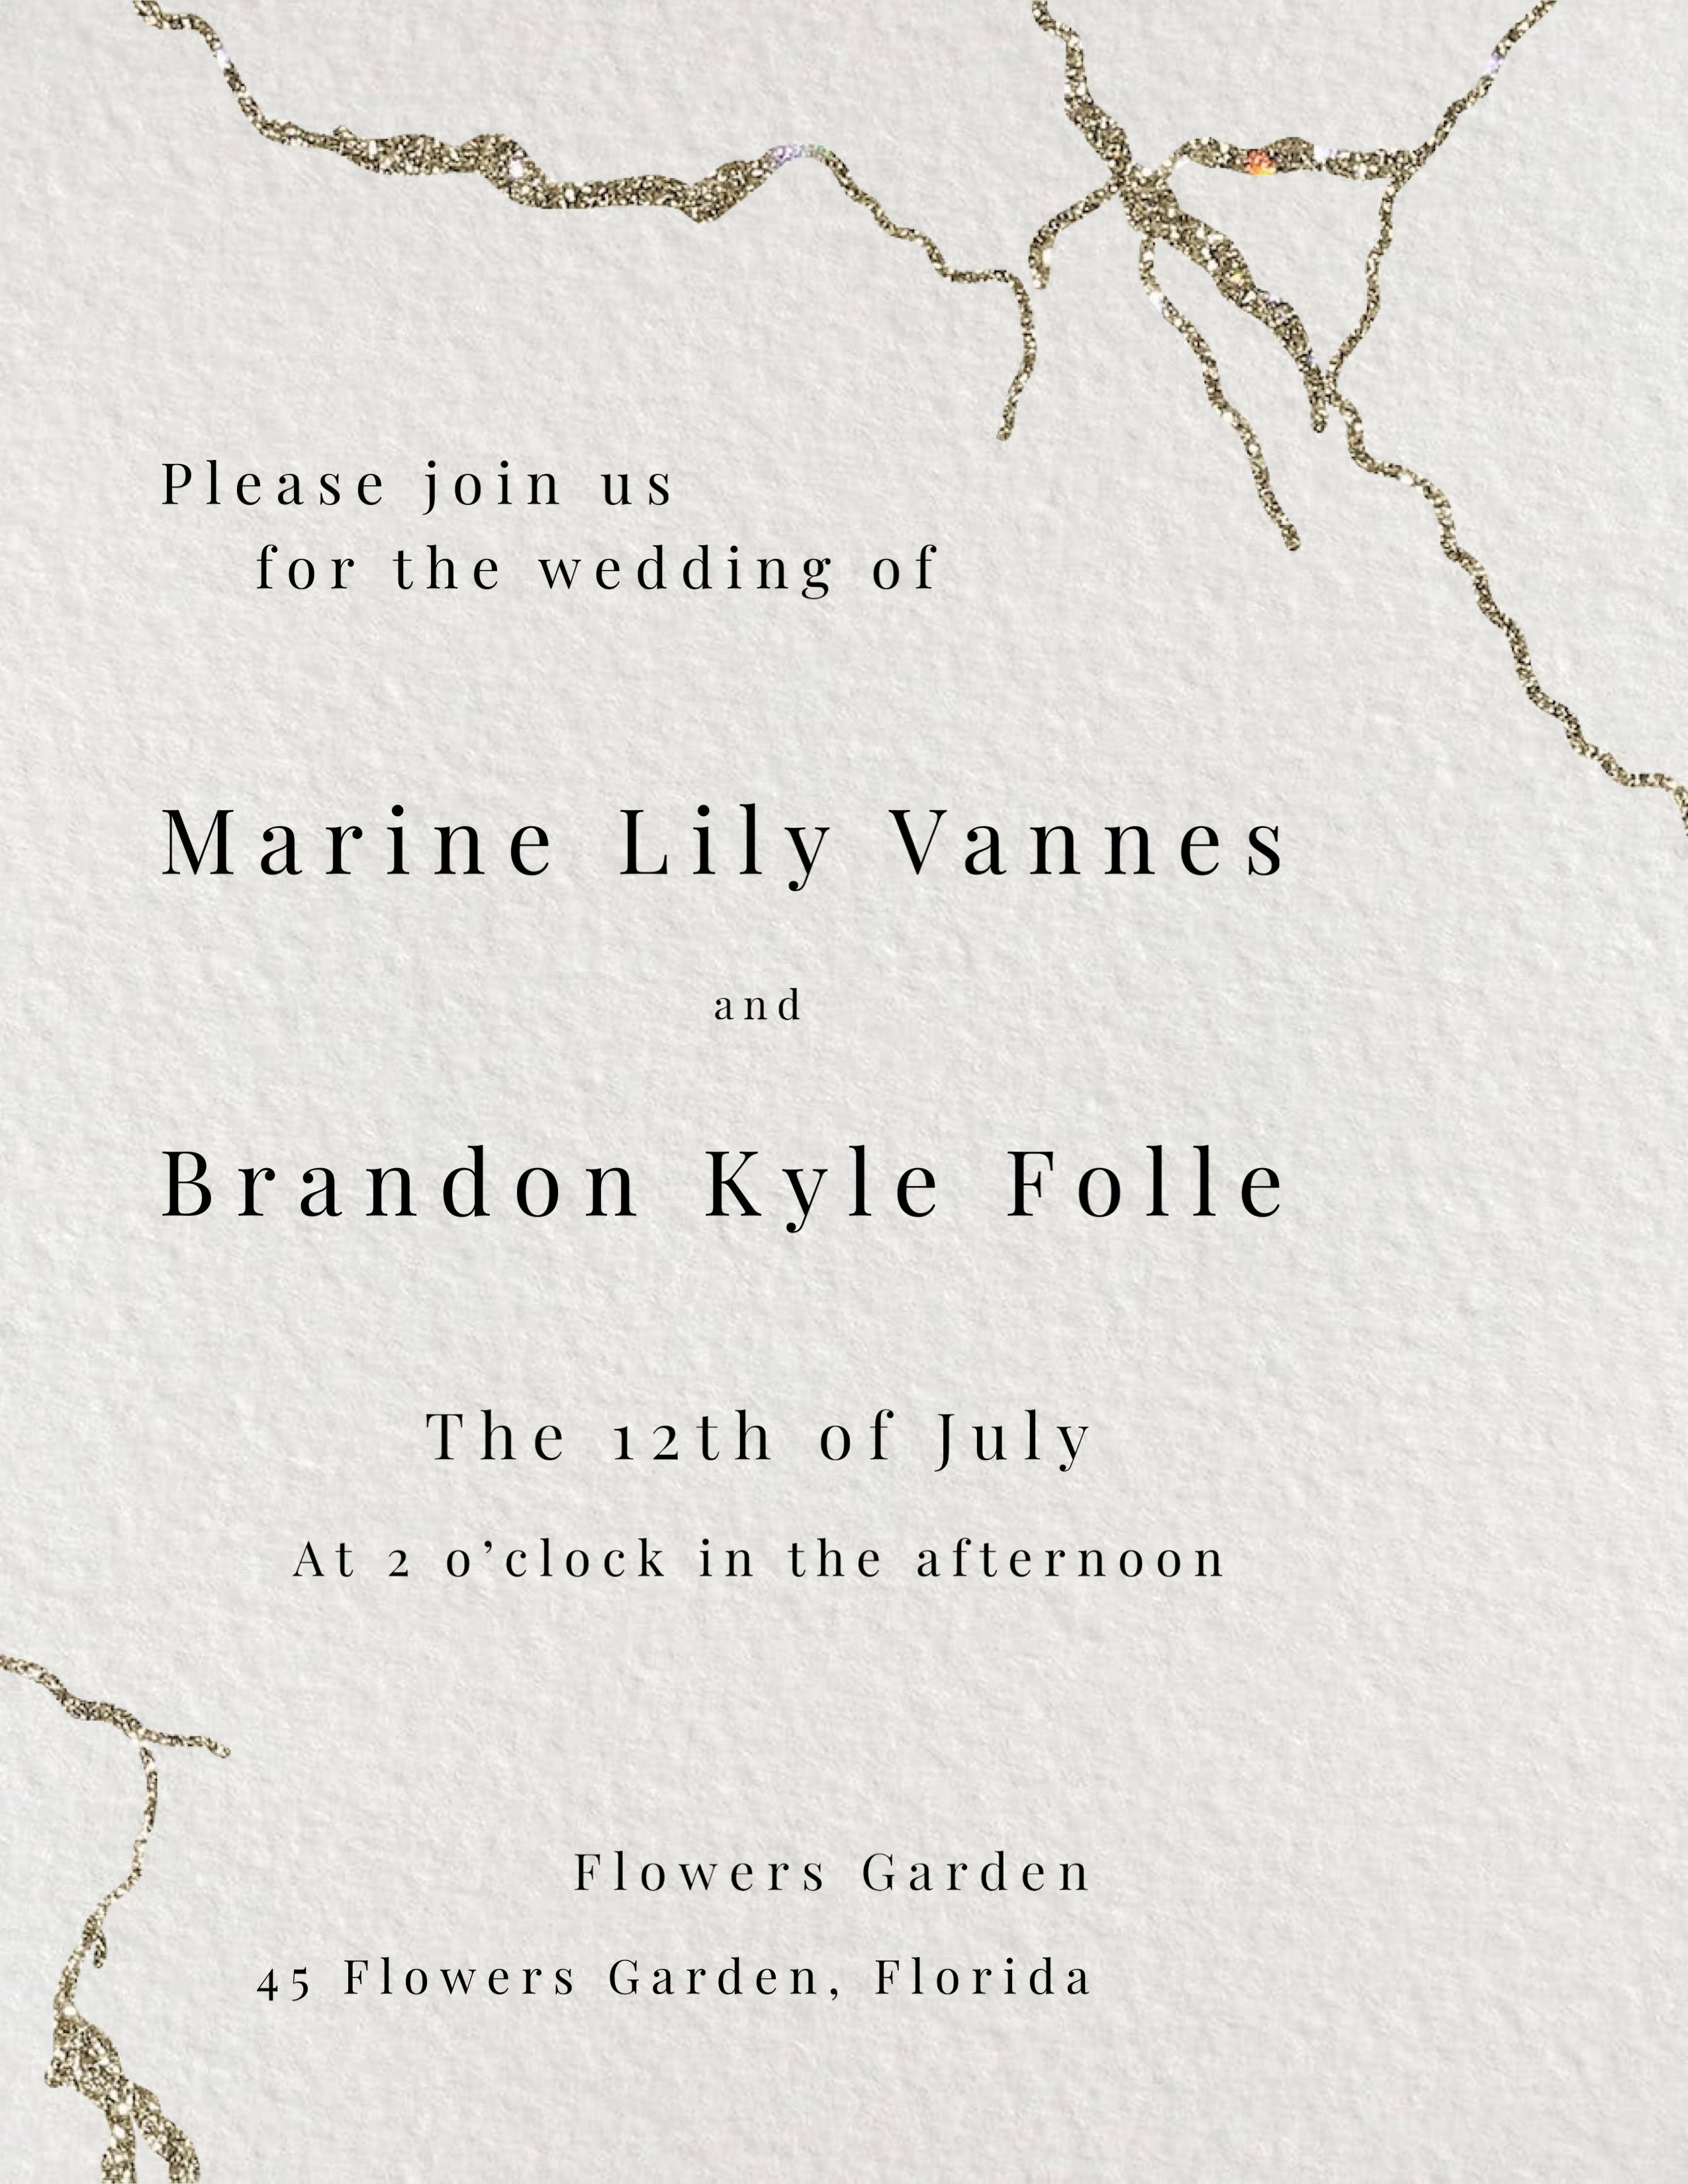 A White Wedding Card With Gold Foil On It Wedding Template